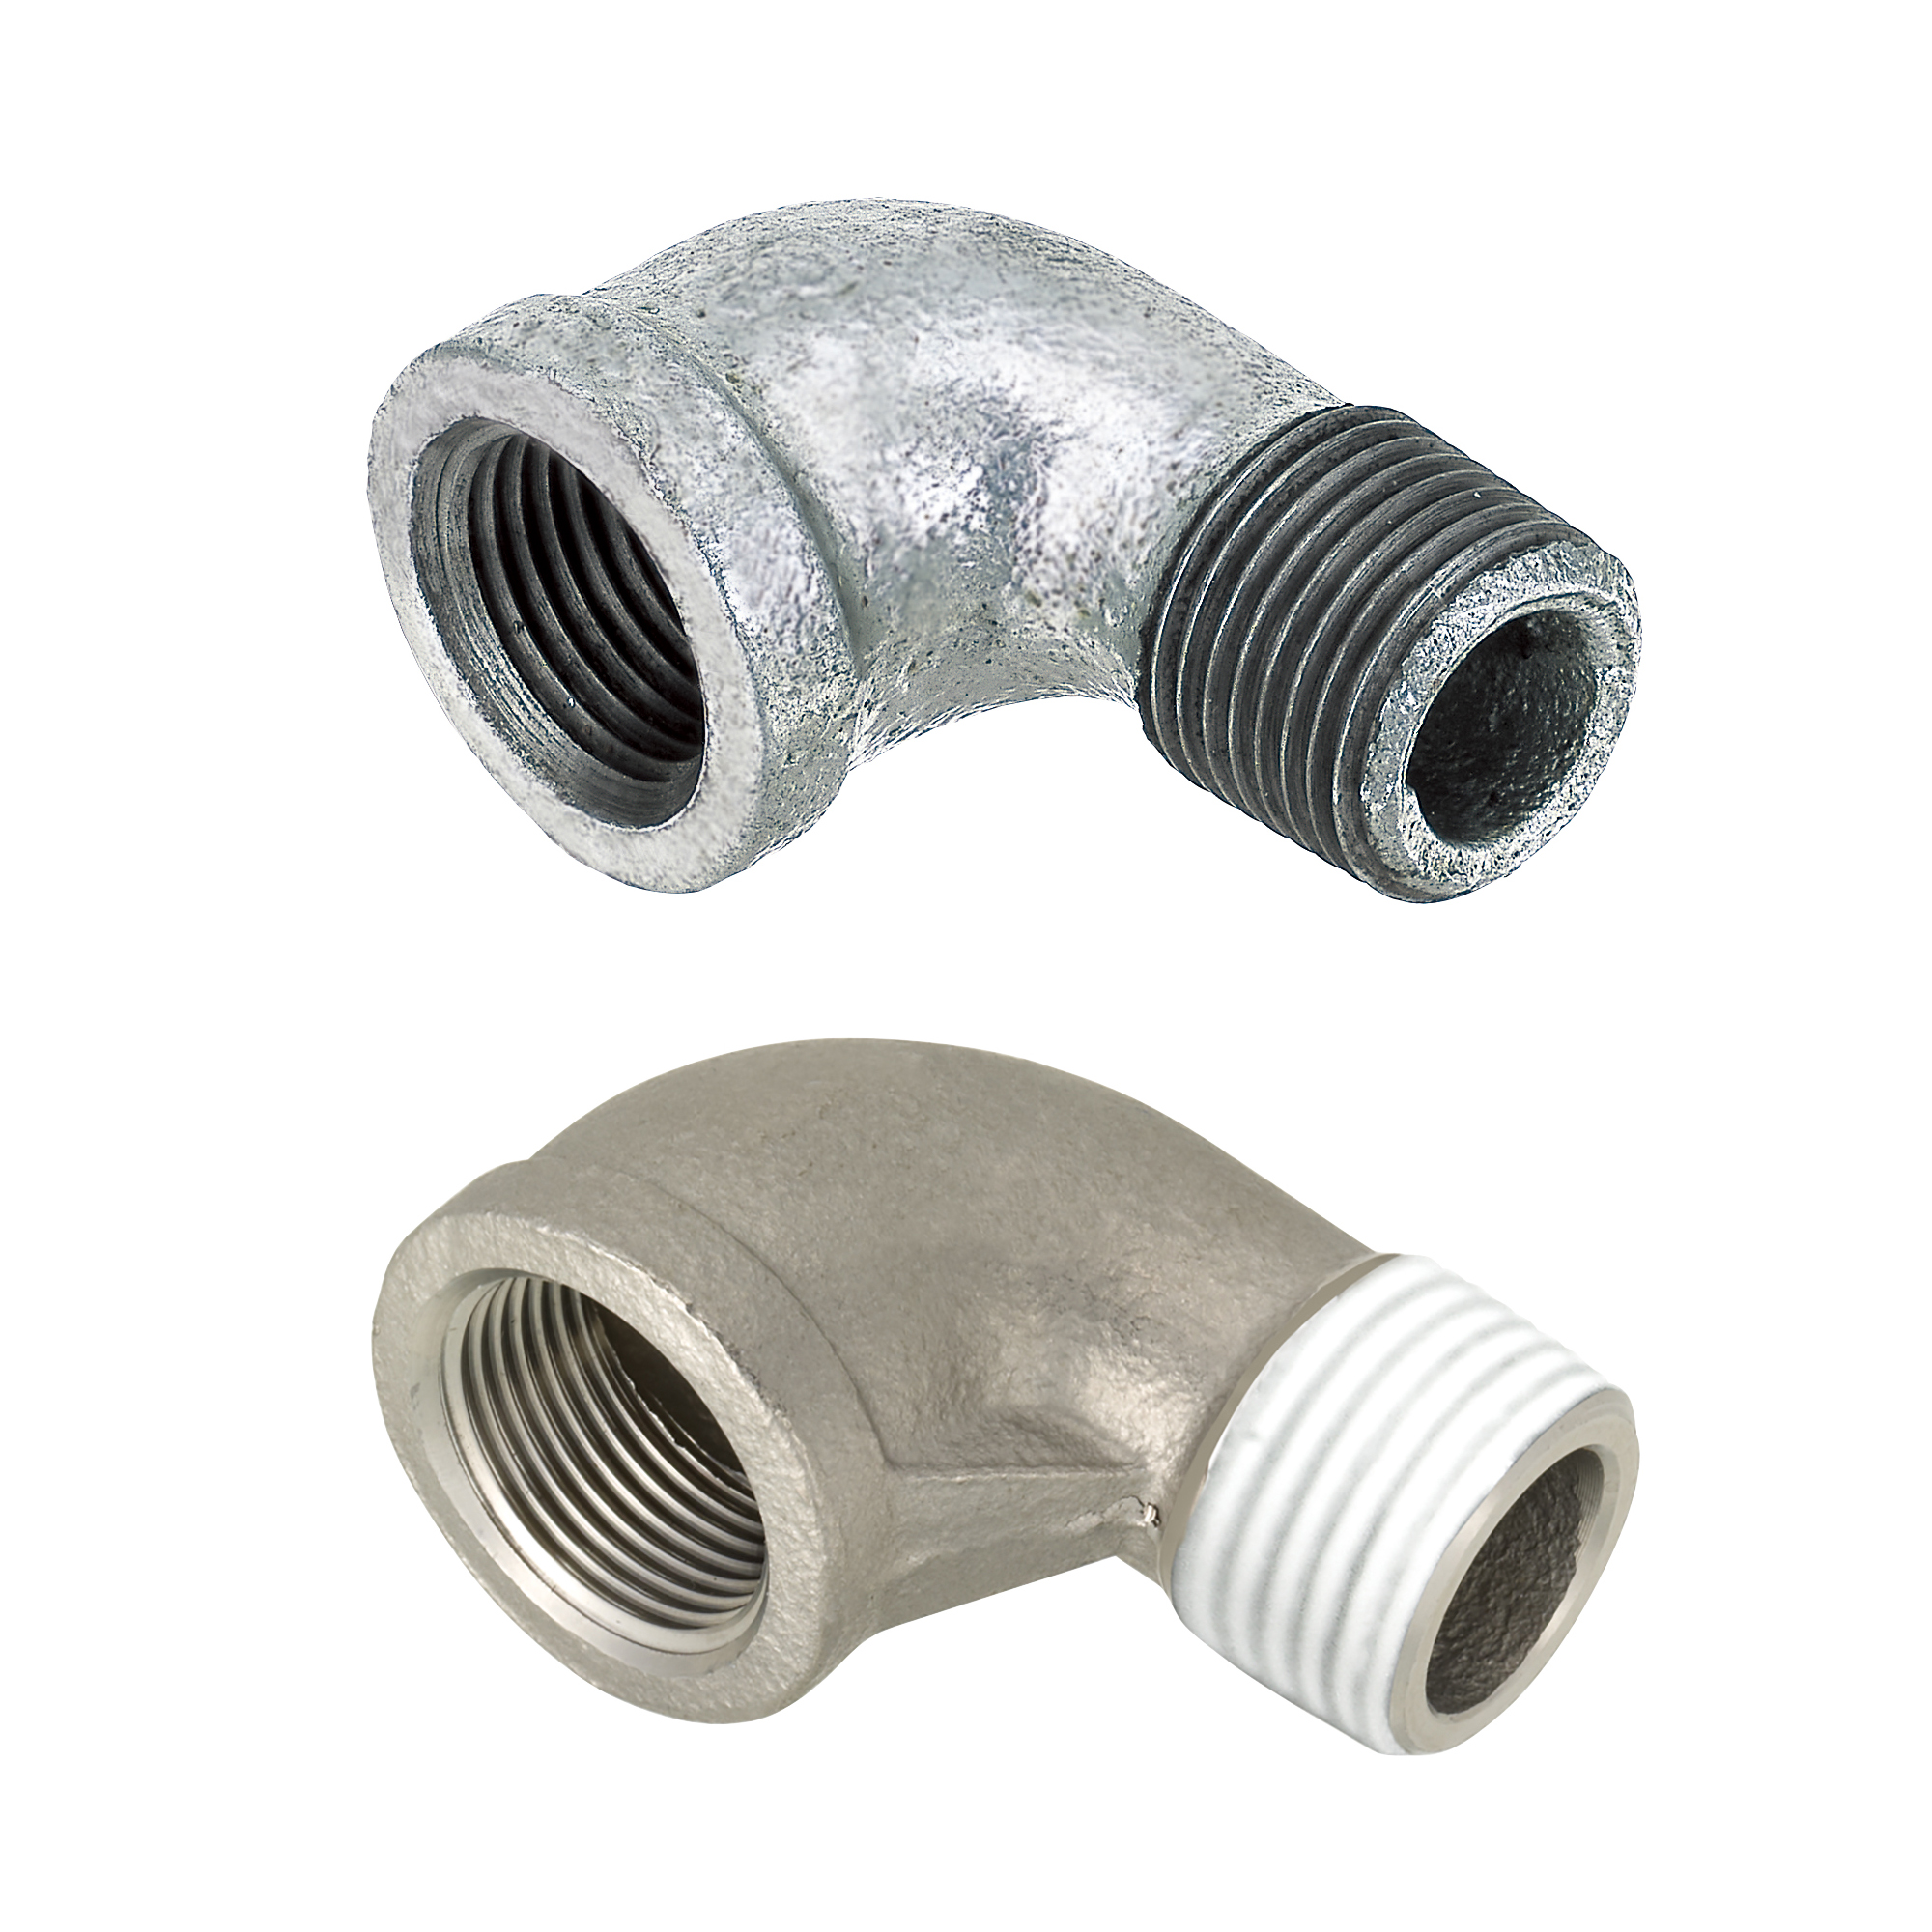 Low Pressure Fittings/90 Deg. Elbow/Threaded and Tapped (SGPPEL40A) 